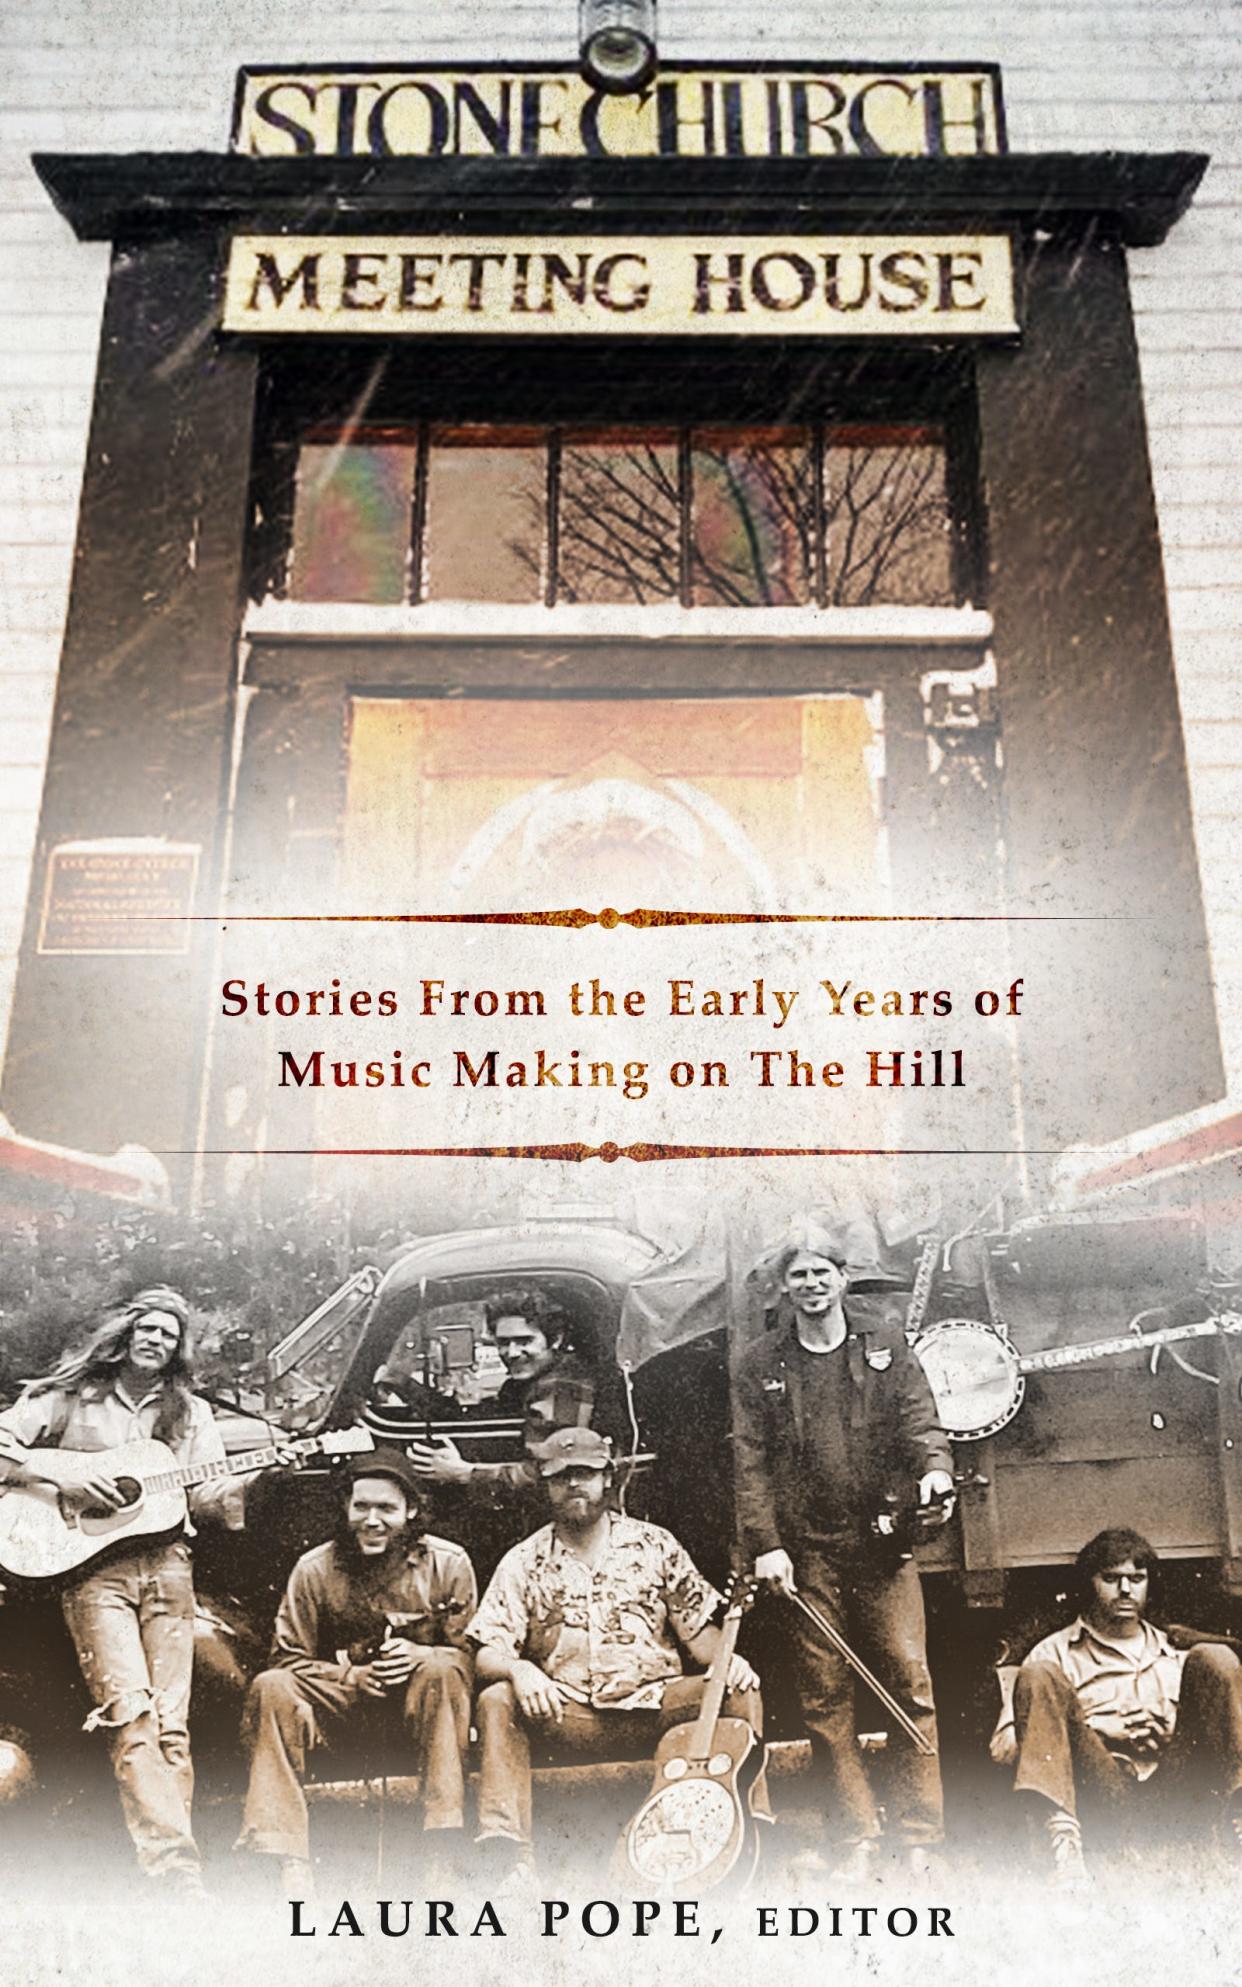 “Stone Church Meeting House: Stories from the Early Years of Music Making on The Hill”,book cover.